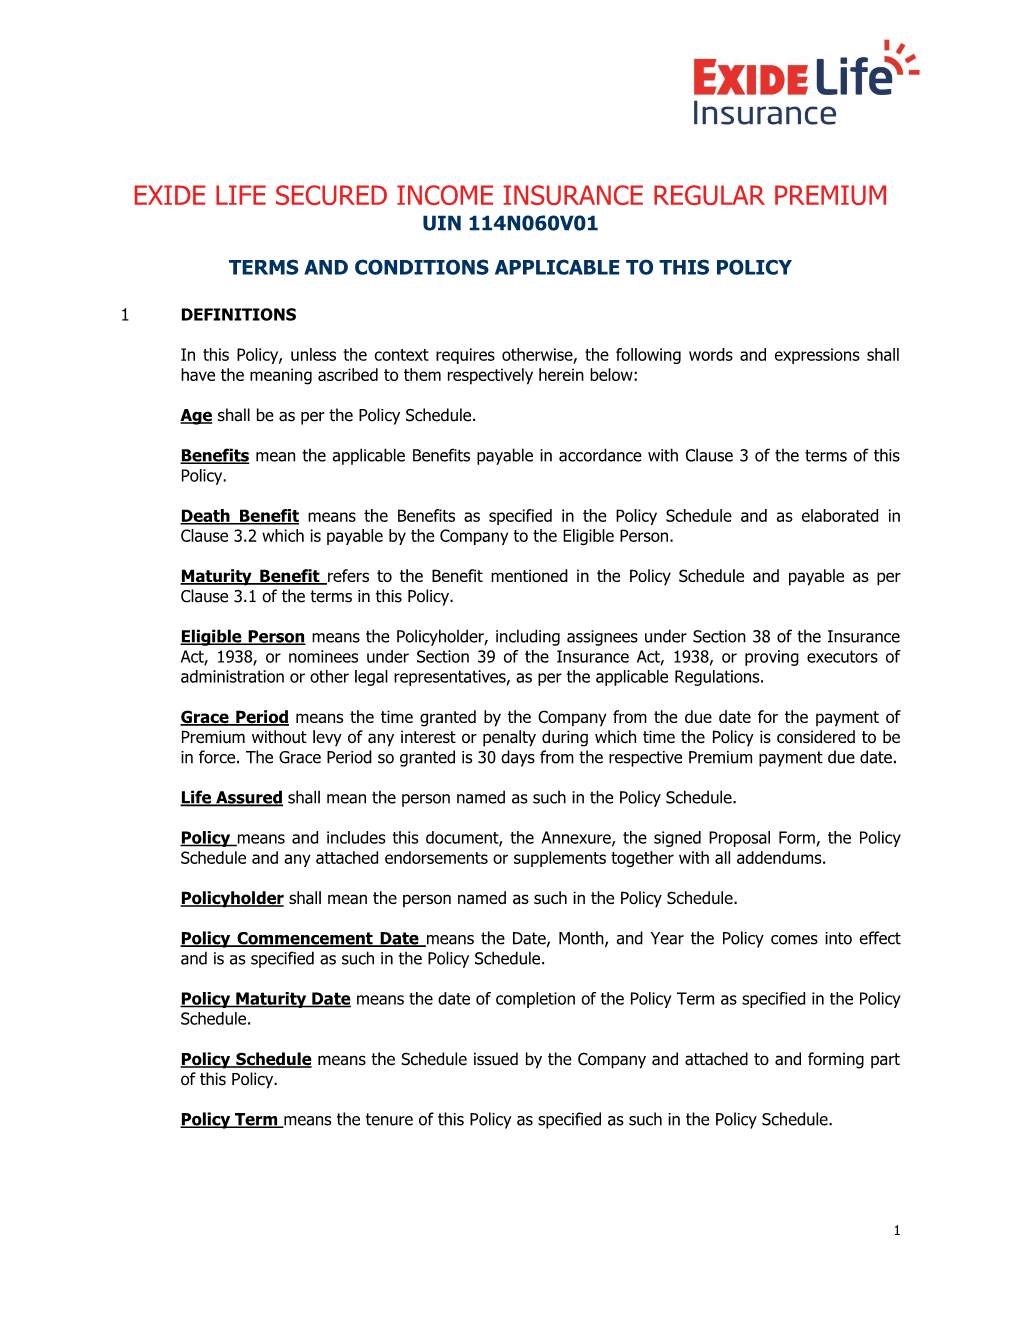 Exide Life Secured Income Insurance RP Economy